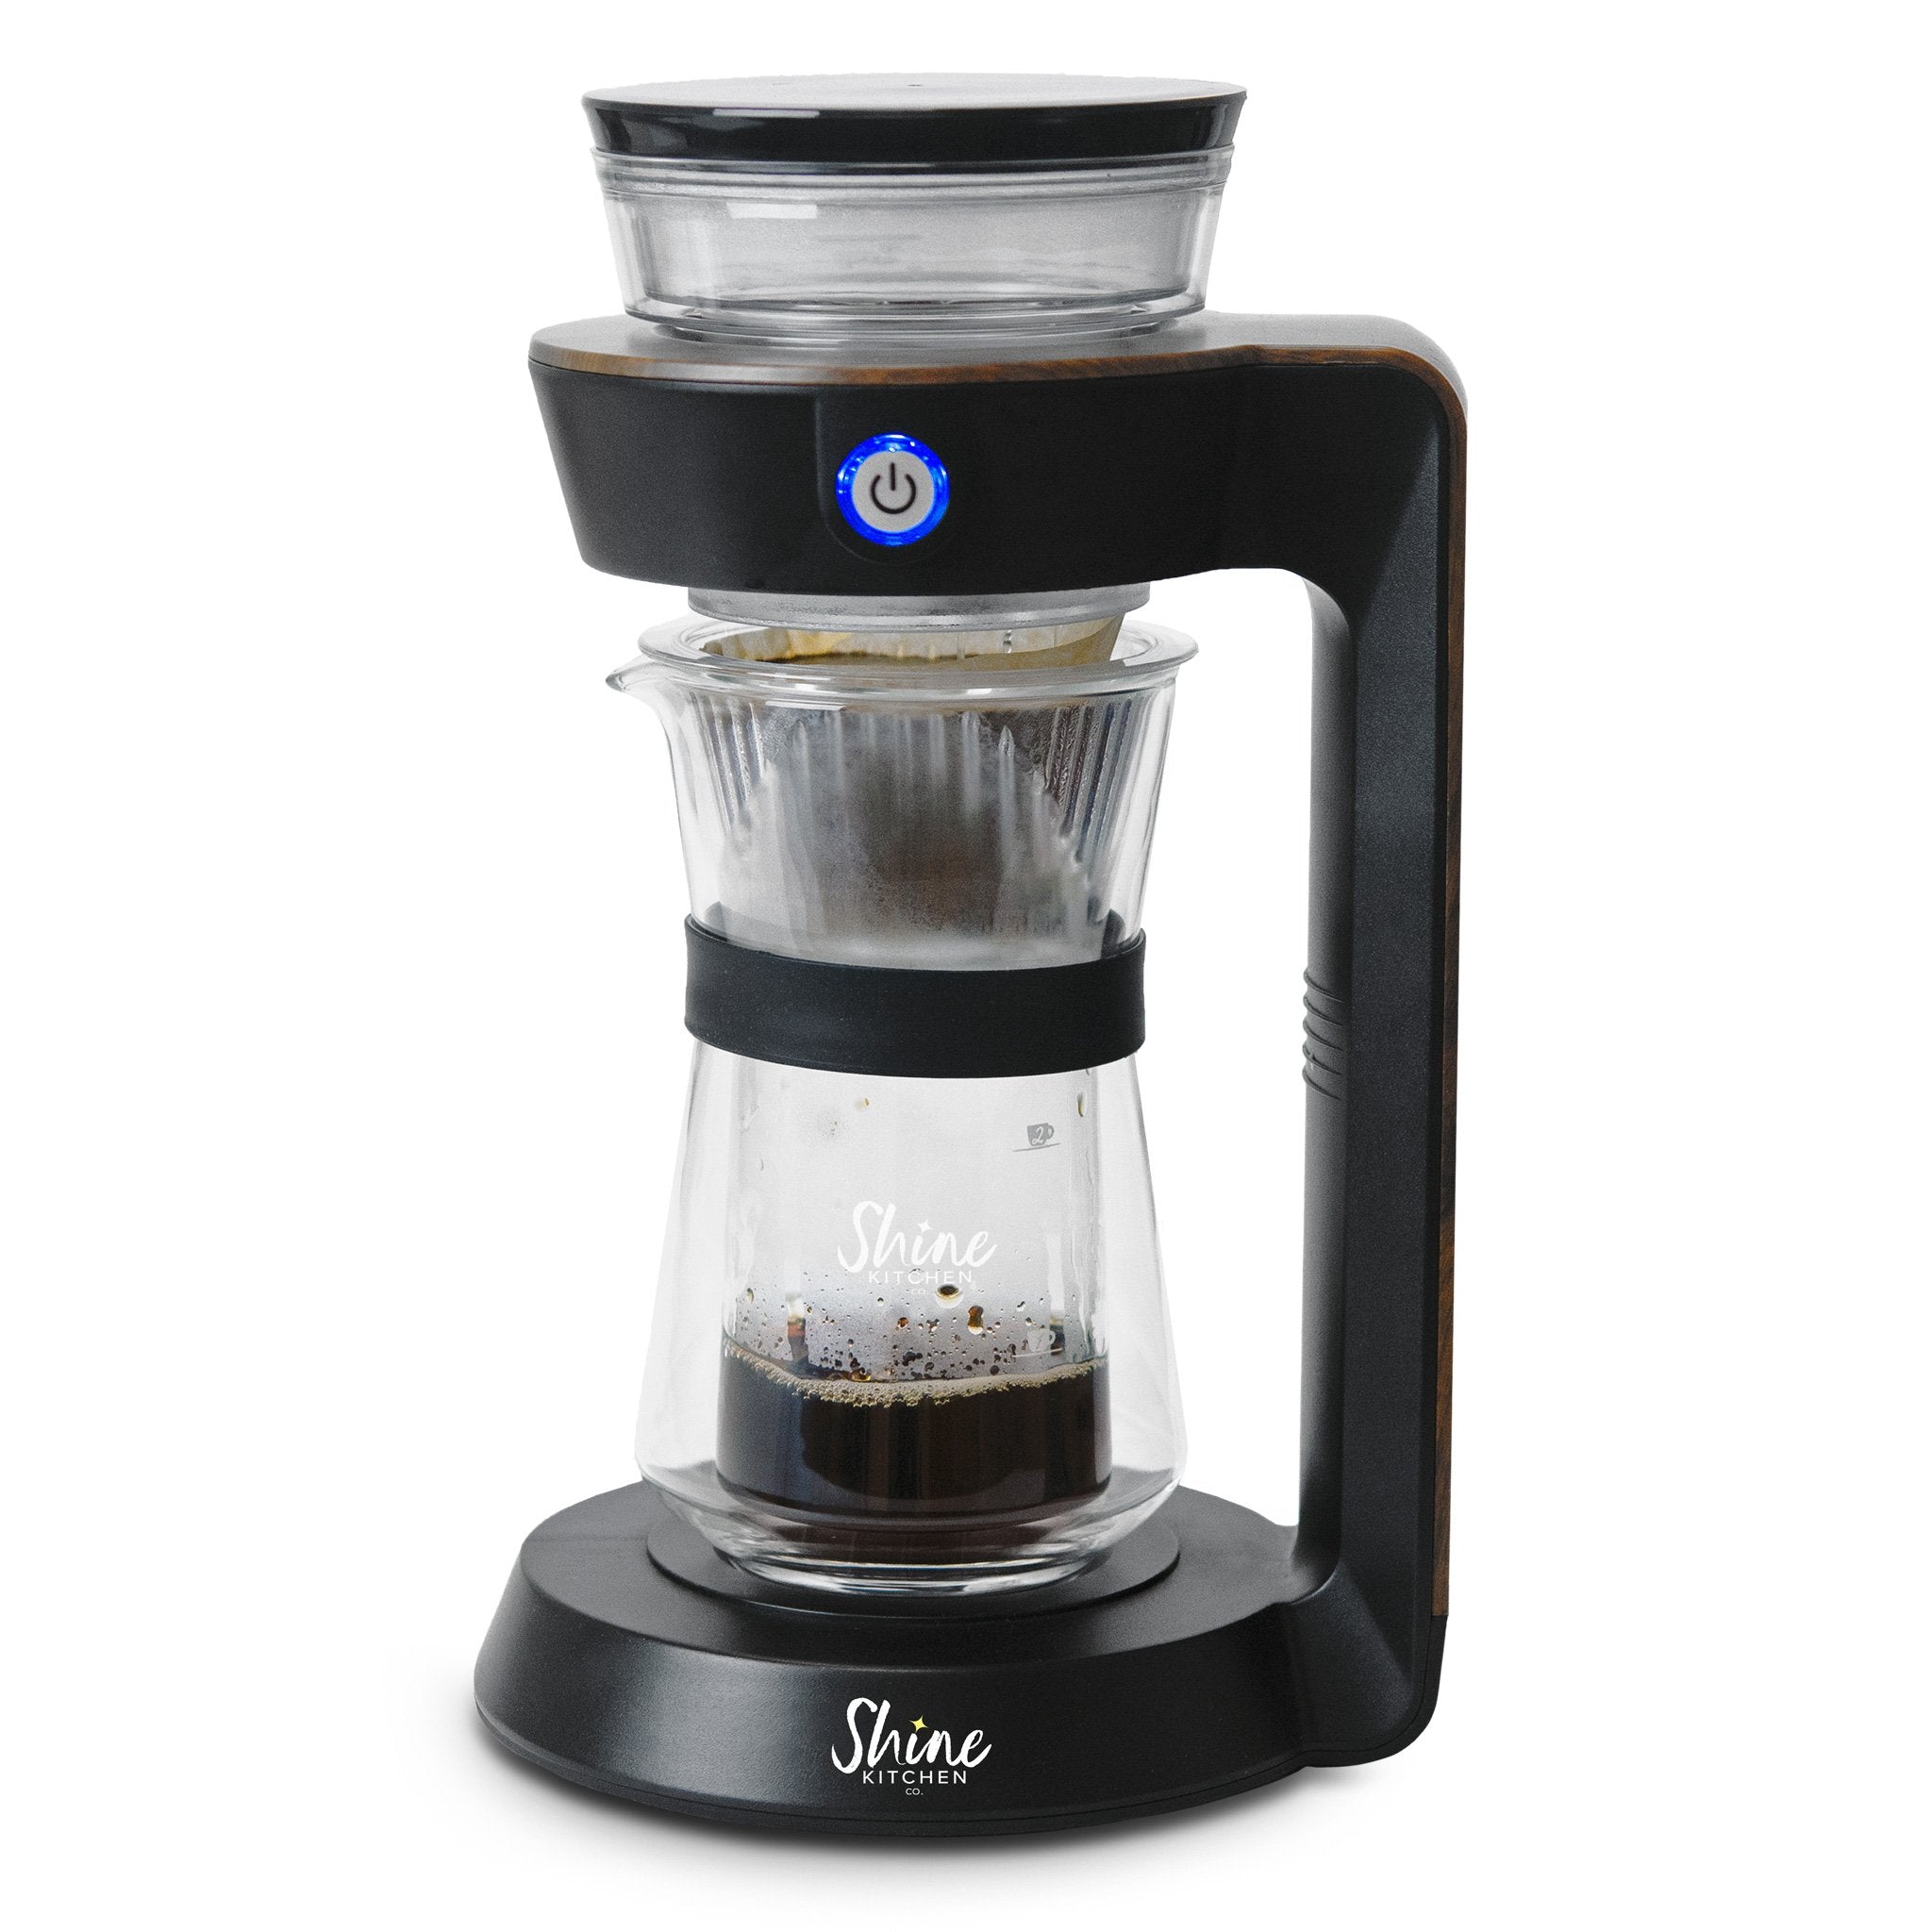 Slow Drip Coffee Brewer Pourer Pour Over Drip Gourmet Kitchen